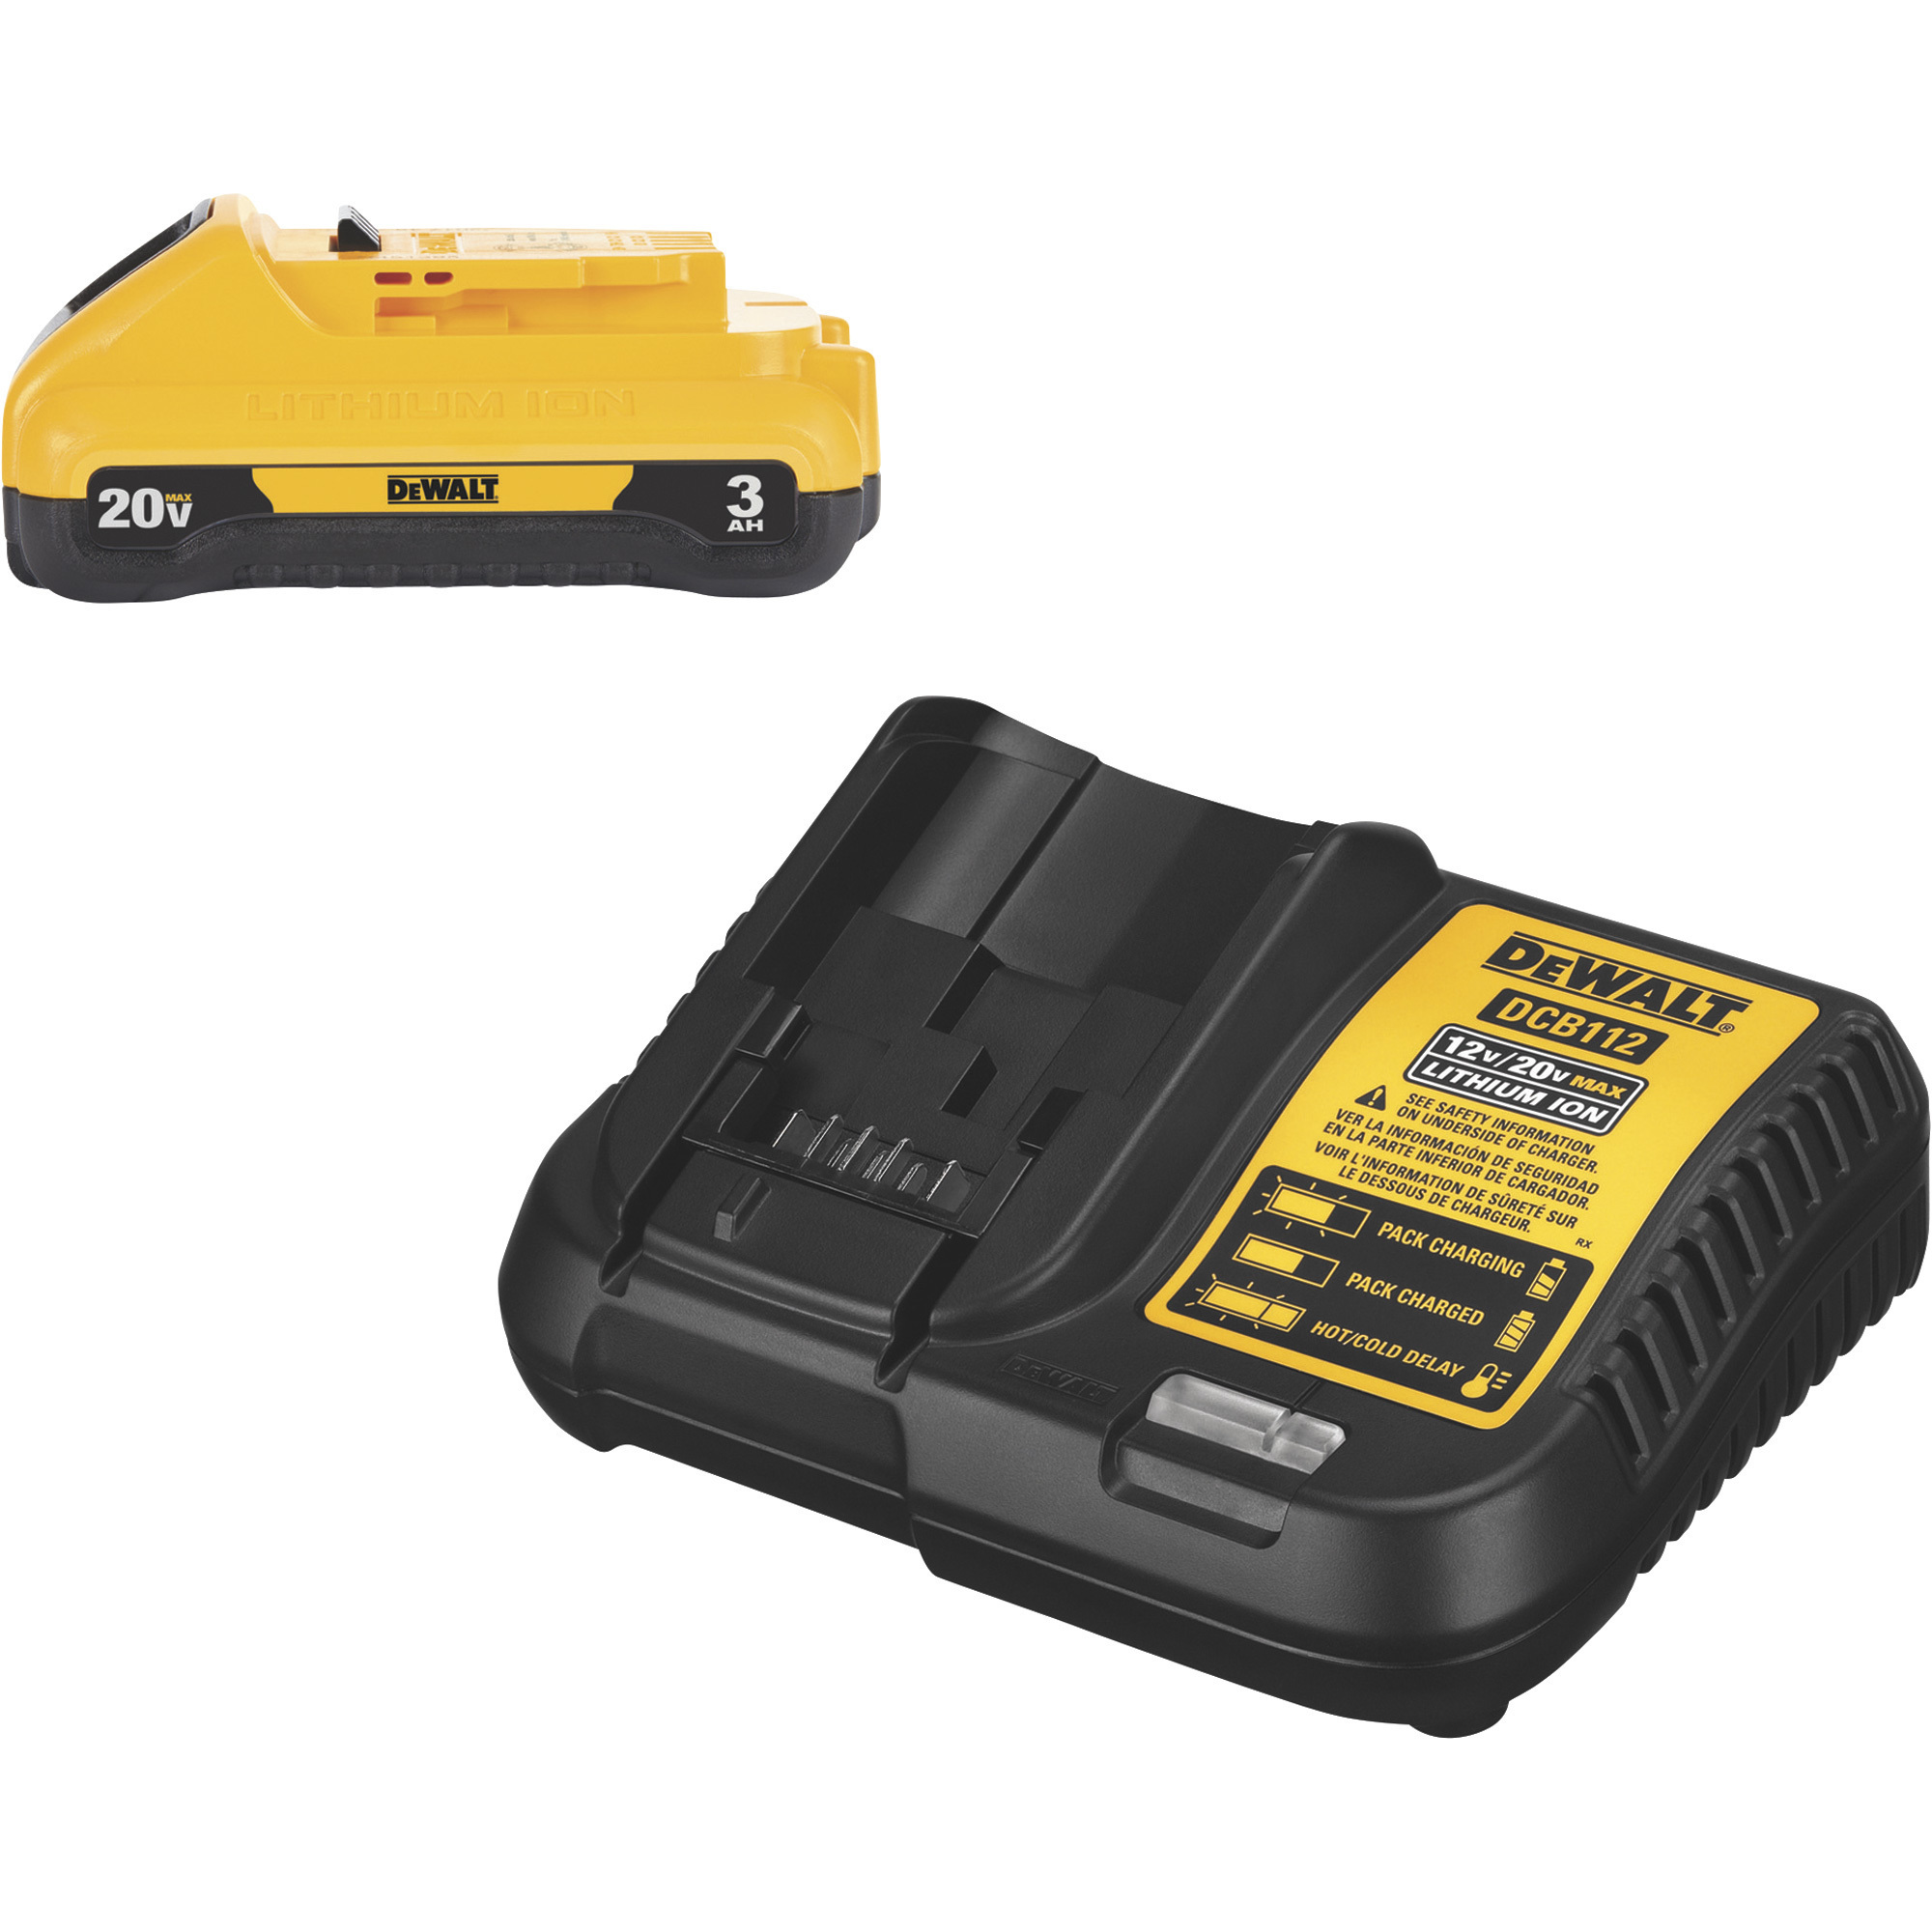 DEWALT 20 Volt MAX* Starter Kit, With 3.0Ah Compact Battery and Charger, Model DCB230C